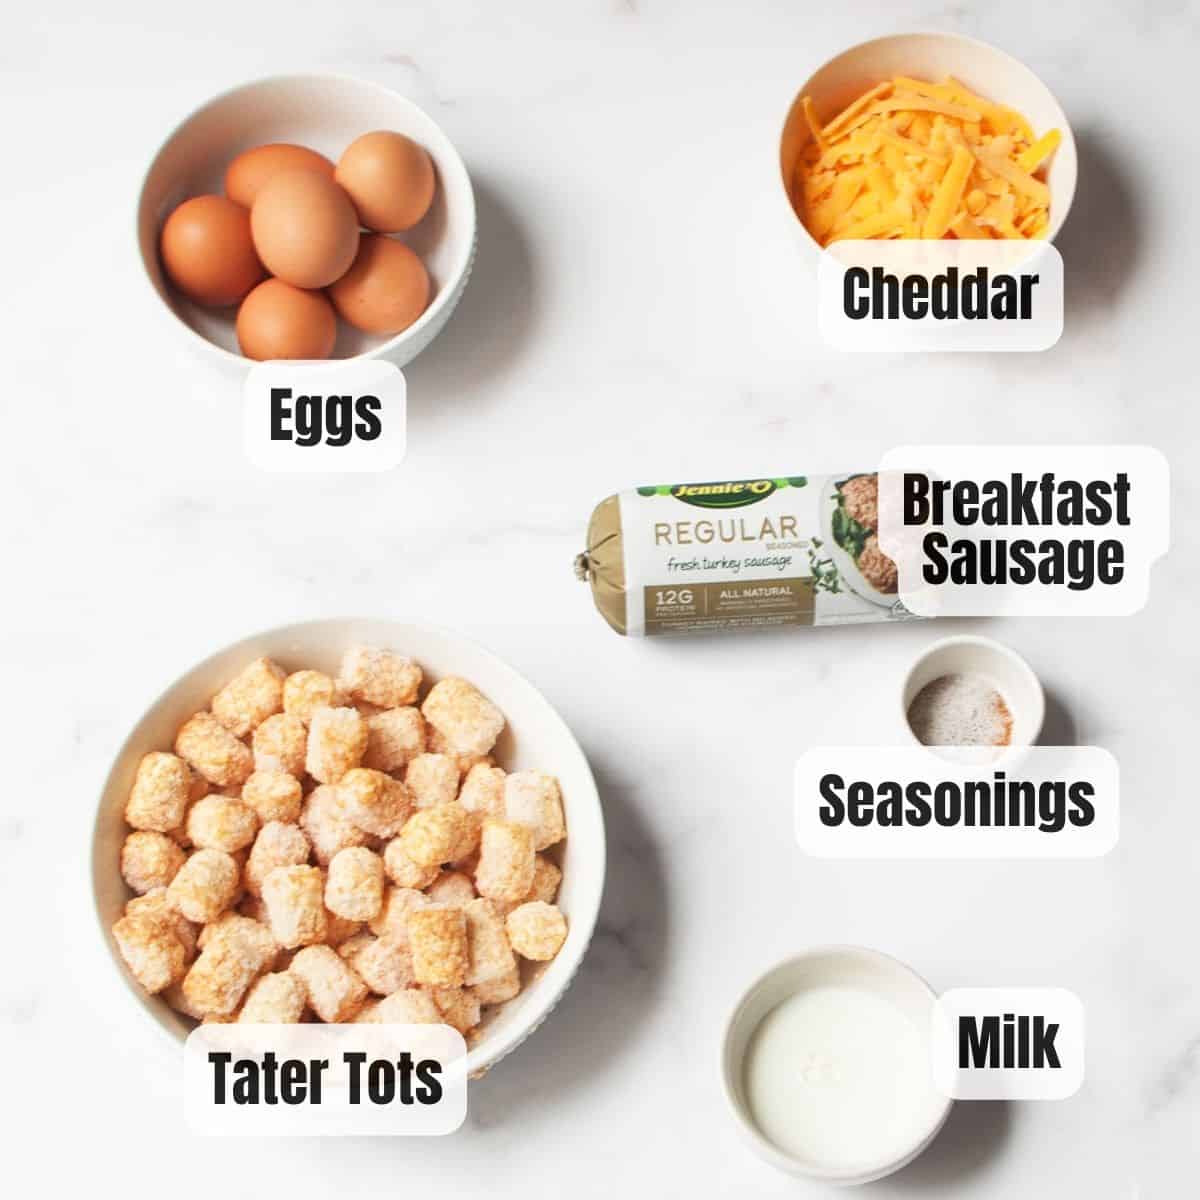 The ingredients needed to make a tater tot breakfast casserole.